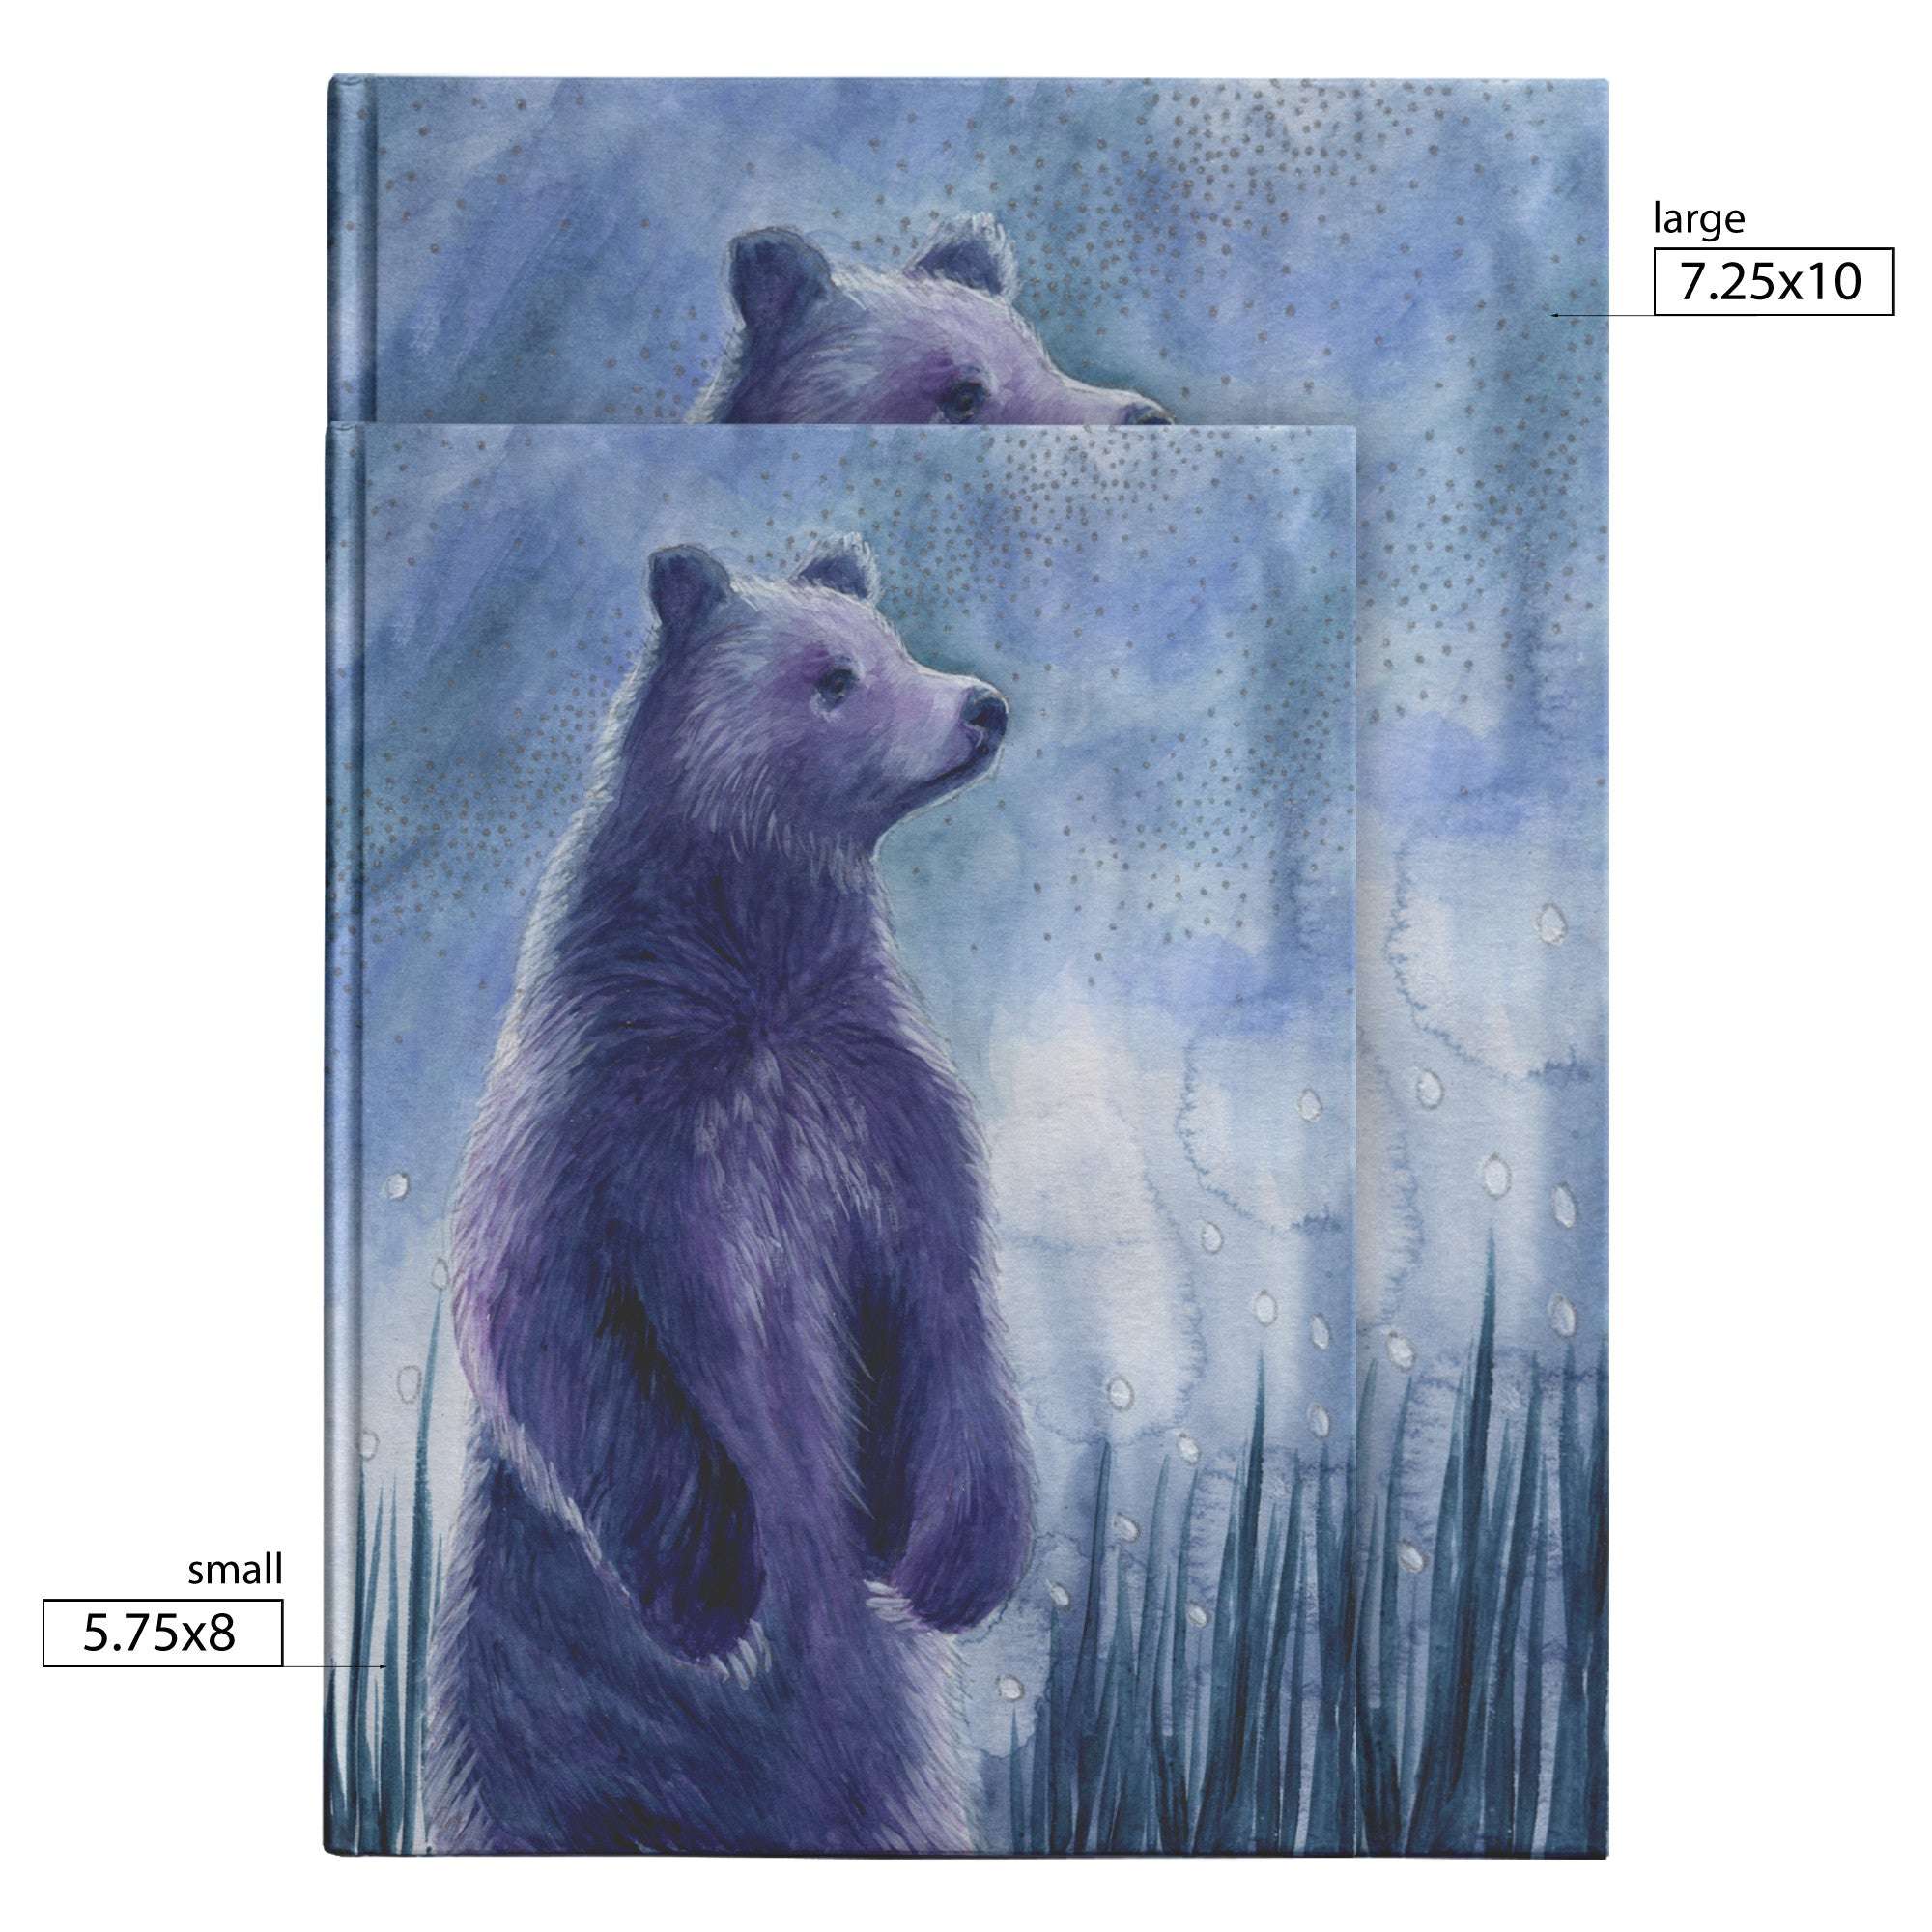 Two watercolor paintings of a standing bear in shades of blue, one large and one small, displayed with size dimensions.